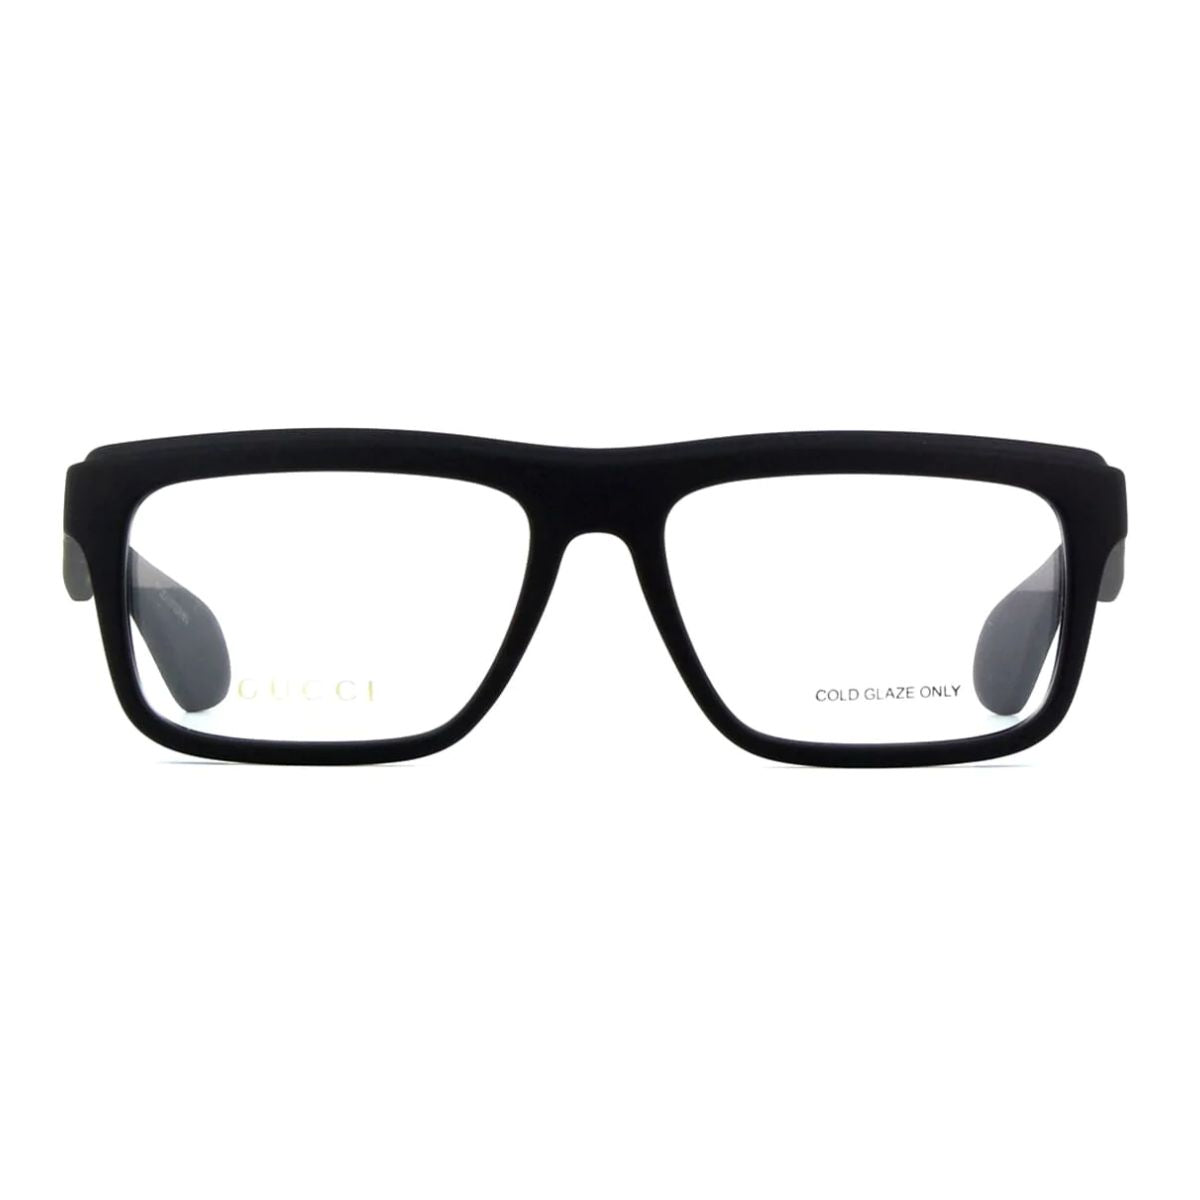  "Stylish Gucci Spectacles - Model 1572O 001 frames offering sophistication and versatility for all."